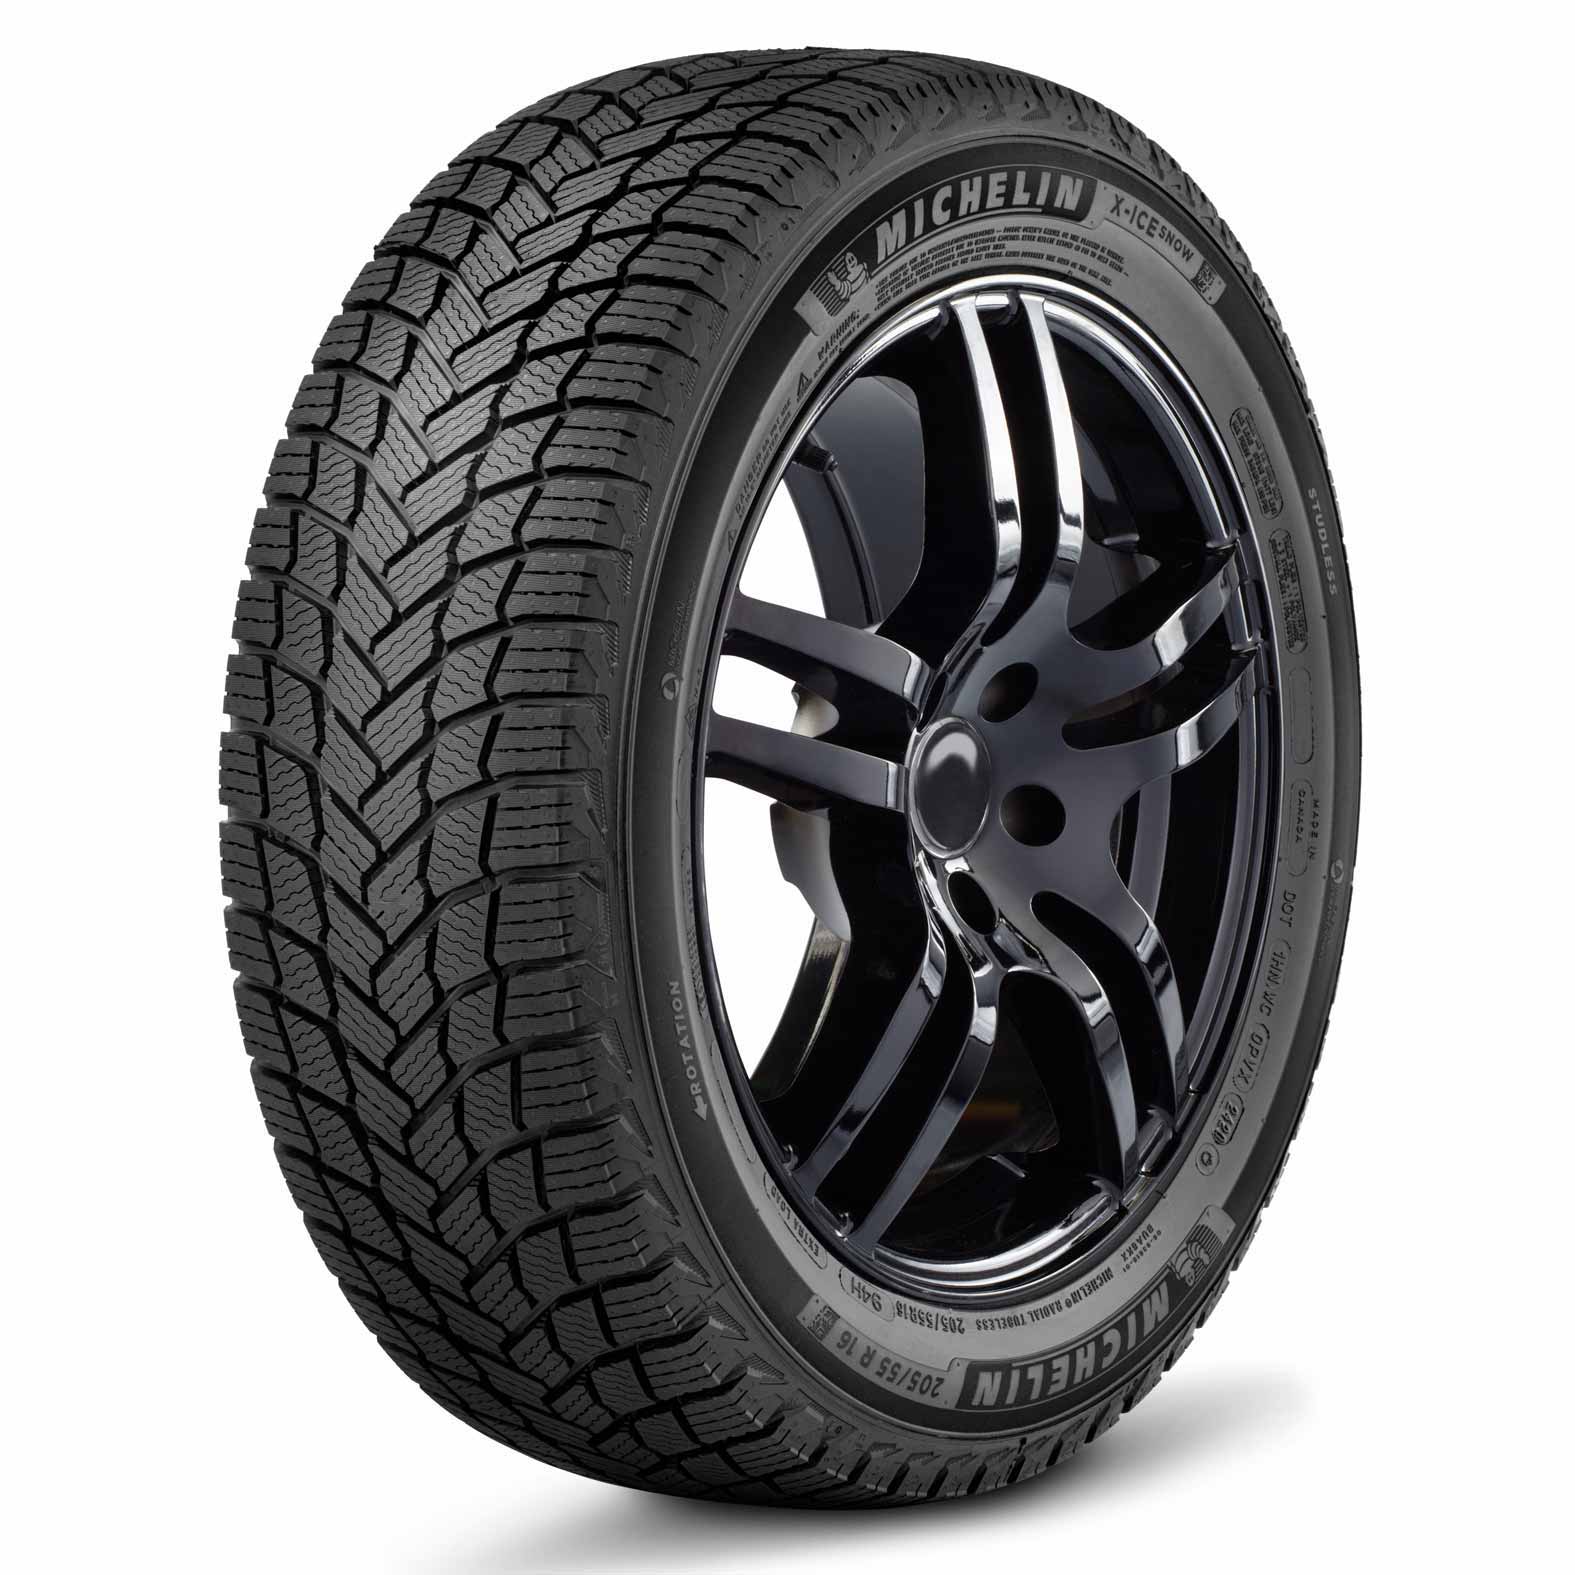 Michelin X-Ice Snow Tire for | Tire Kal Winter